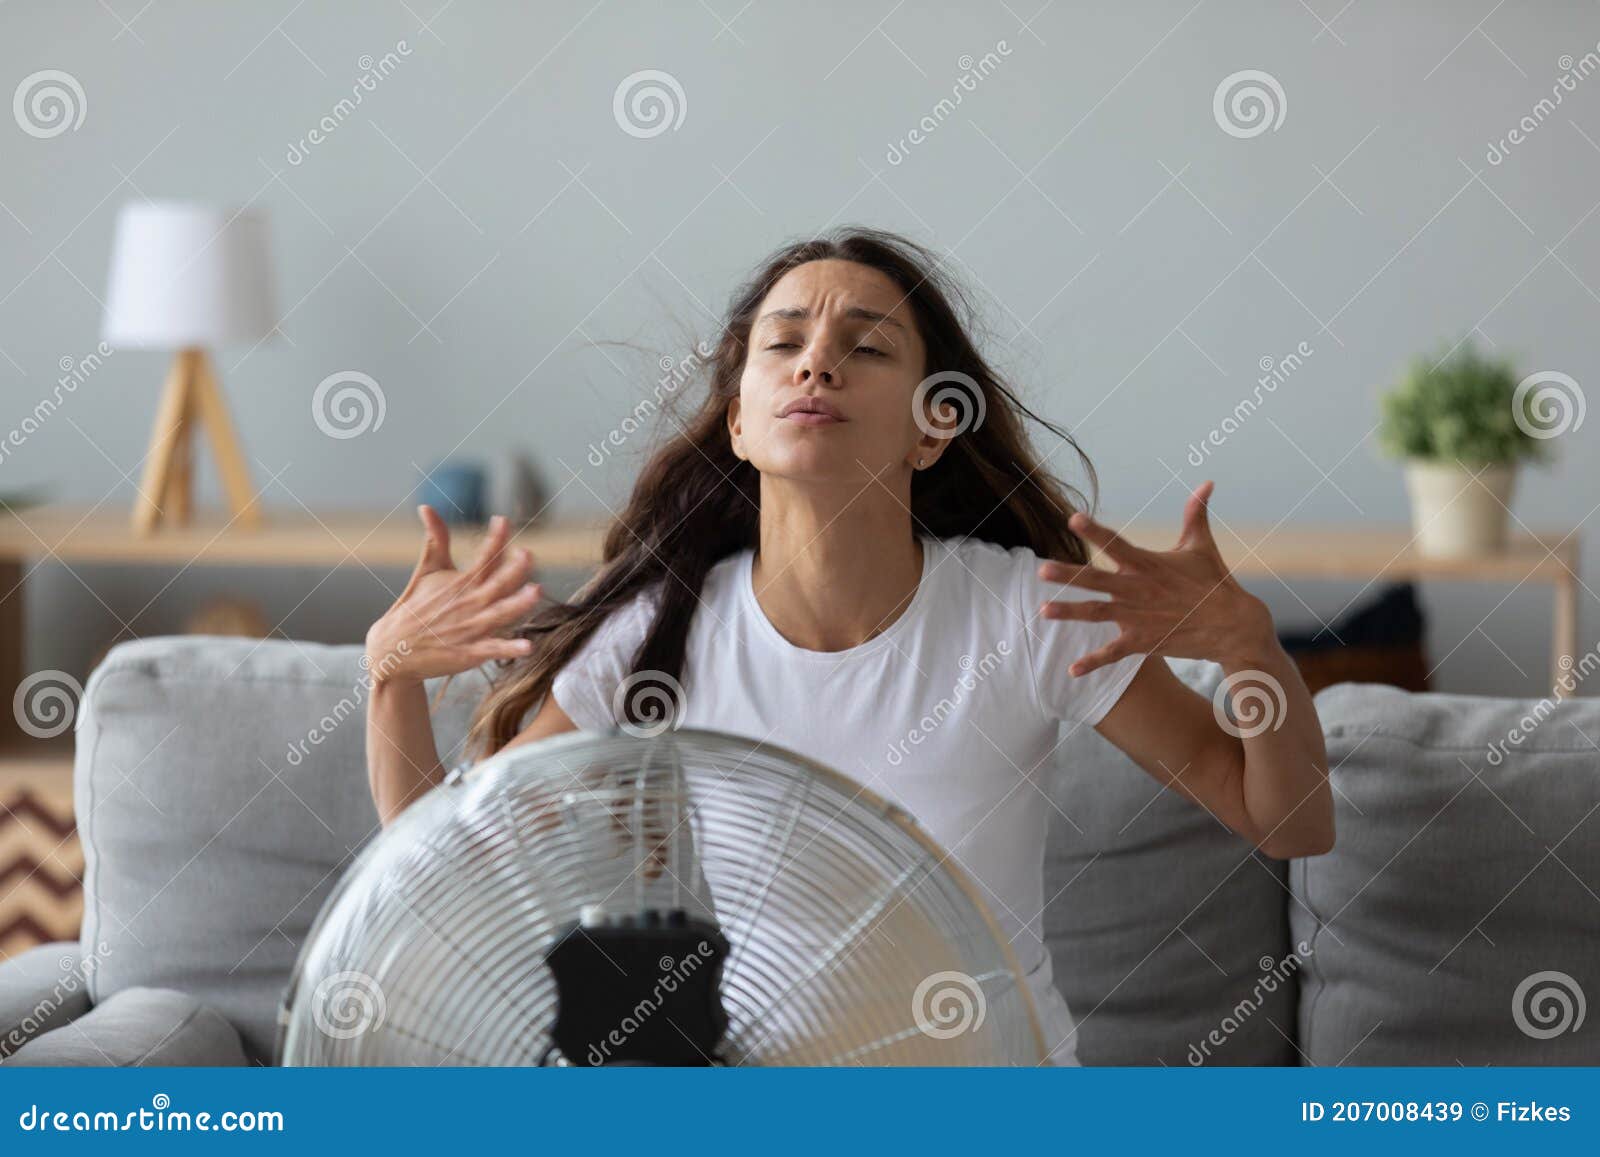 funny overheated woman enjoying fresh air, cooling by electric fan